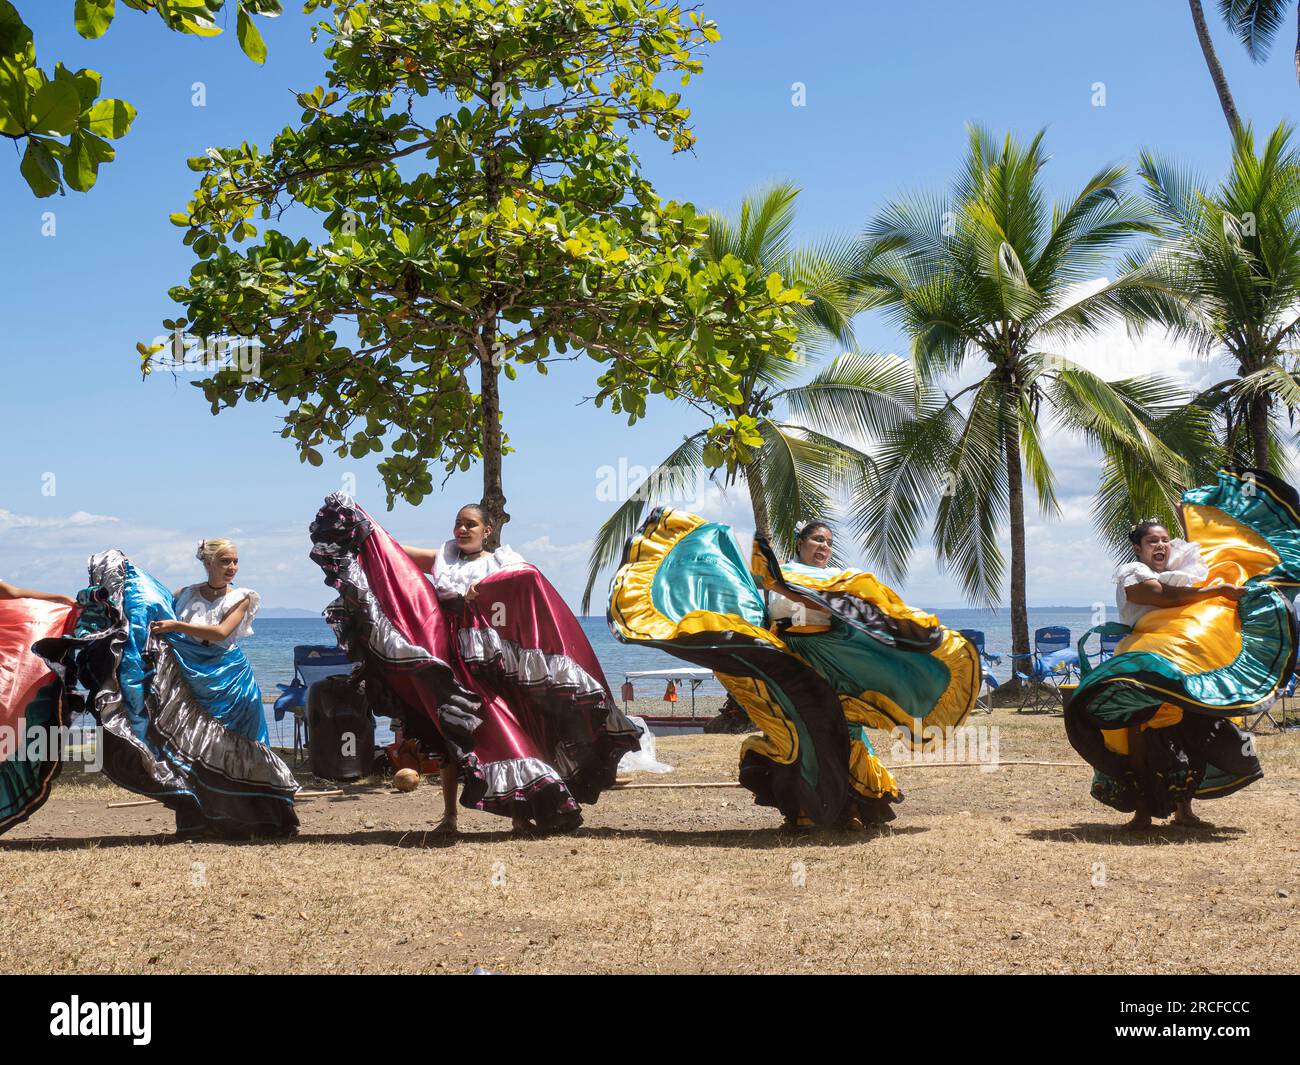 A group of young Costa Rican dancers in traditional dress perform at Playa Blanca, El Golfito, Costa Rica. Stock Photo